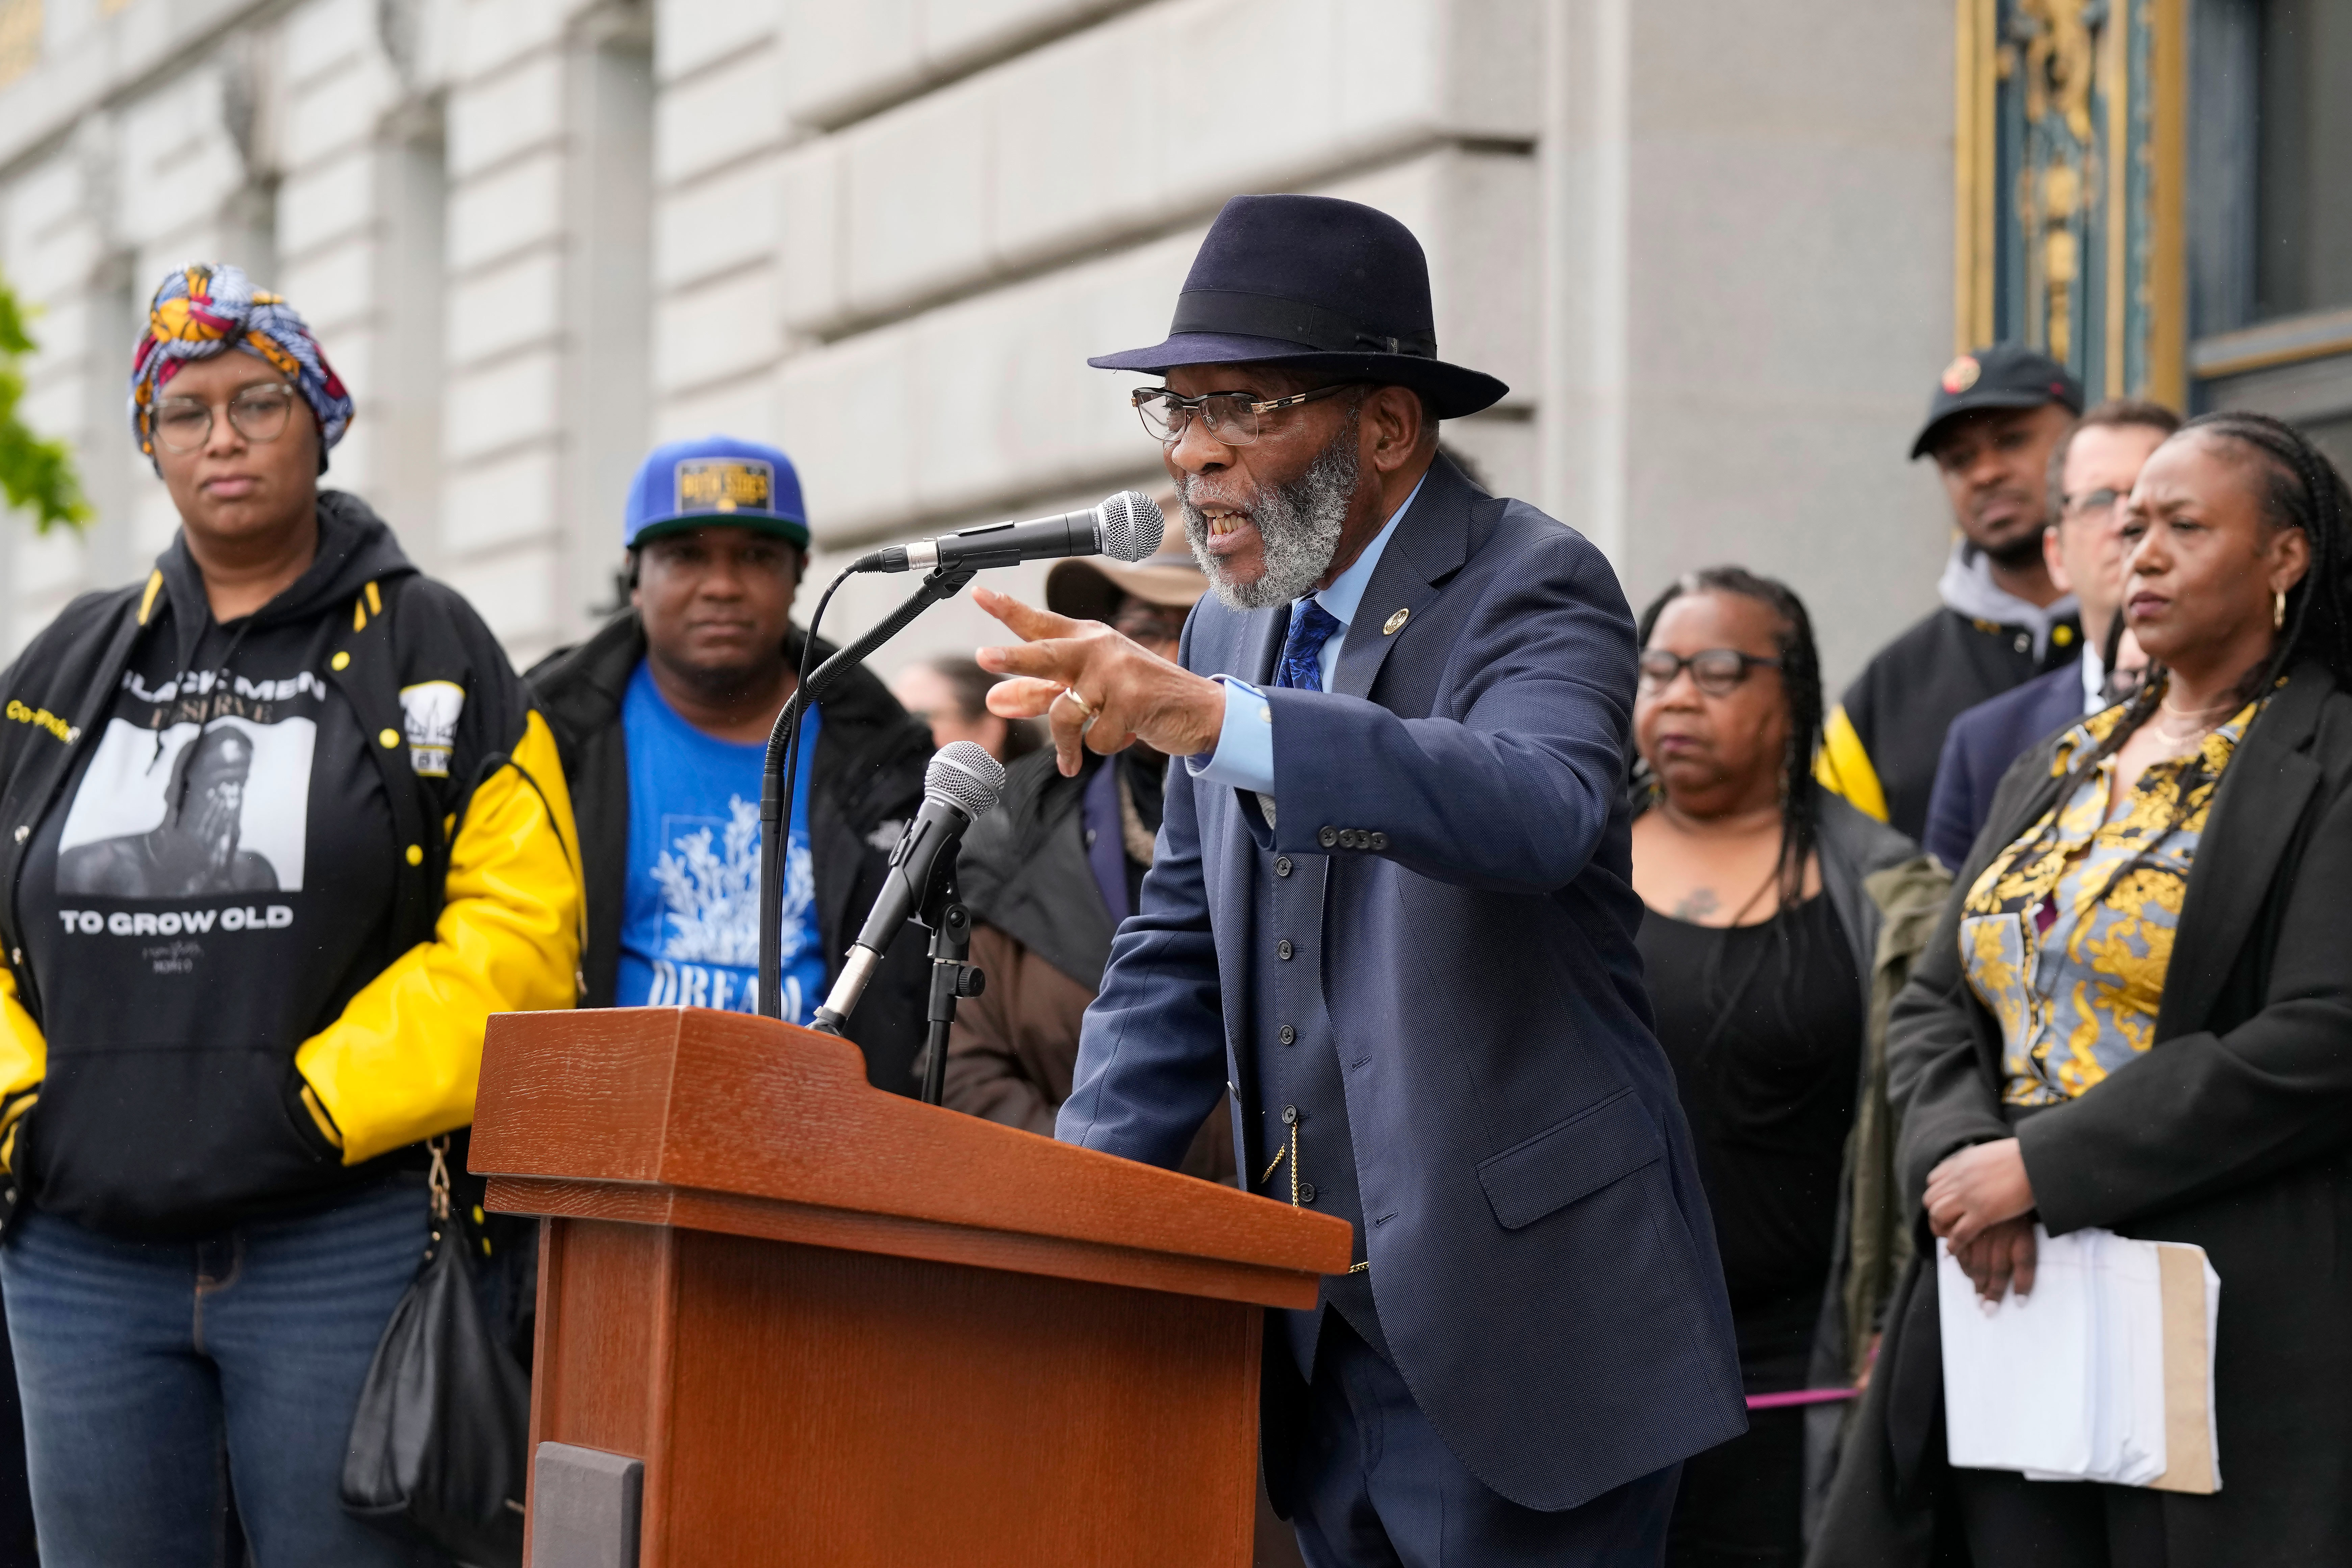 Dr. Amos Brown speaks at a reparations rally.